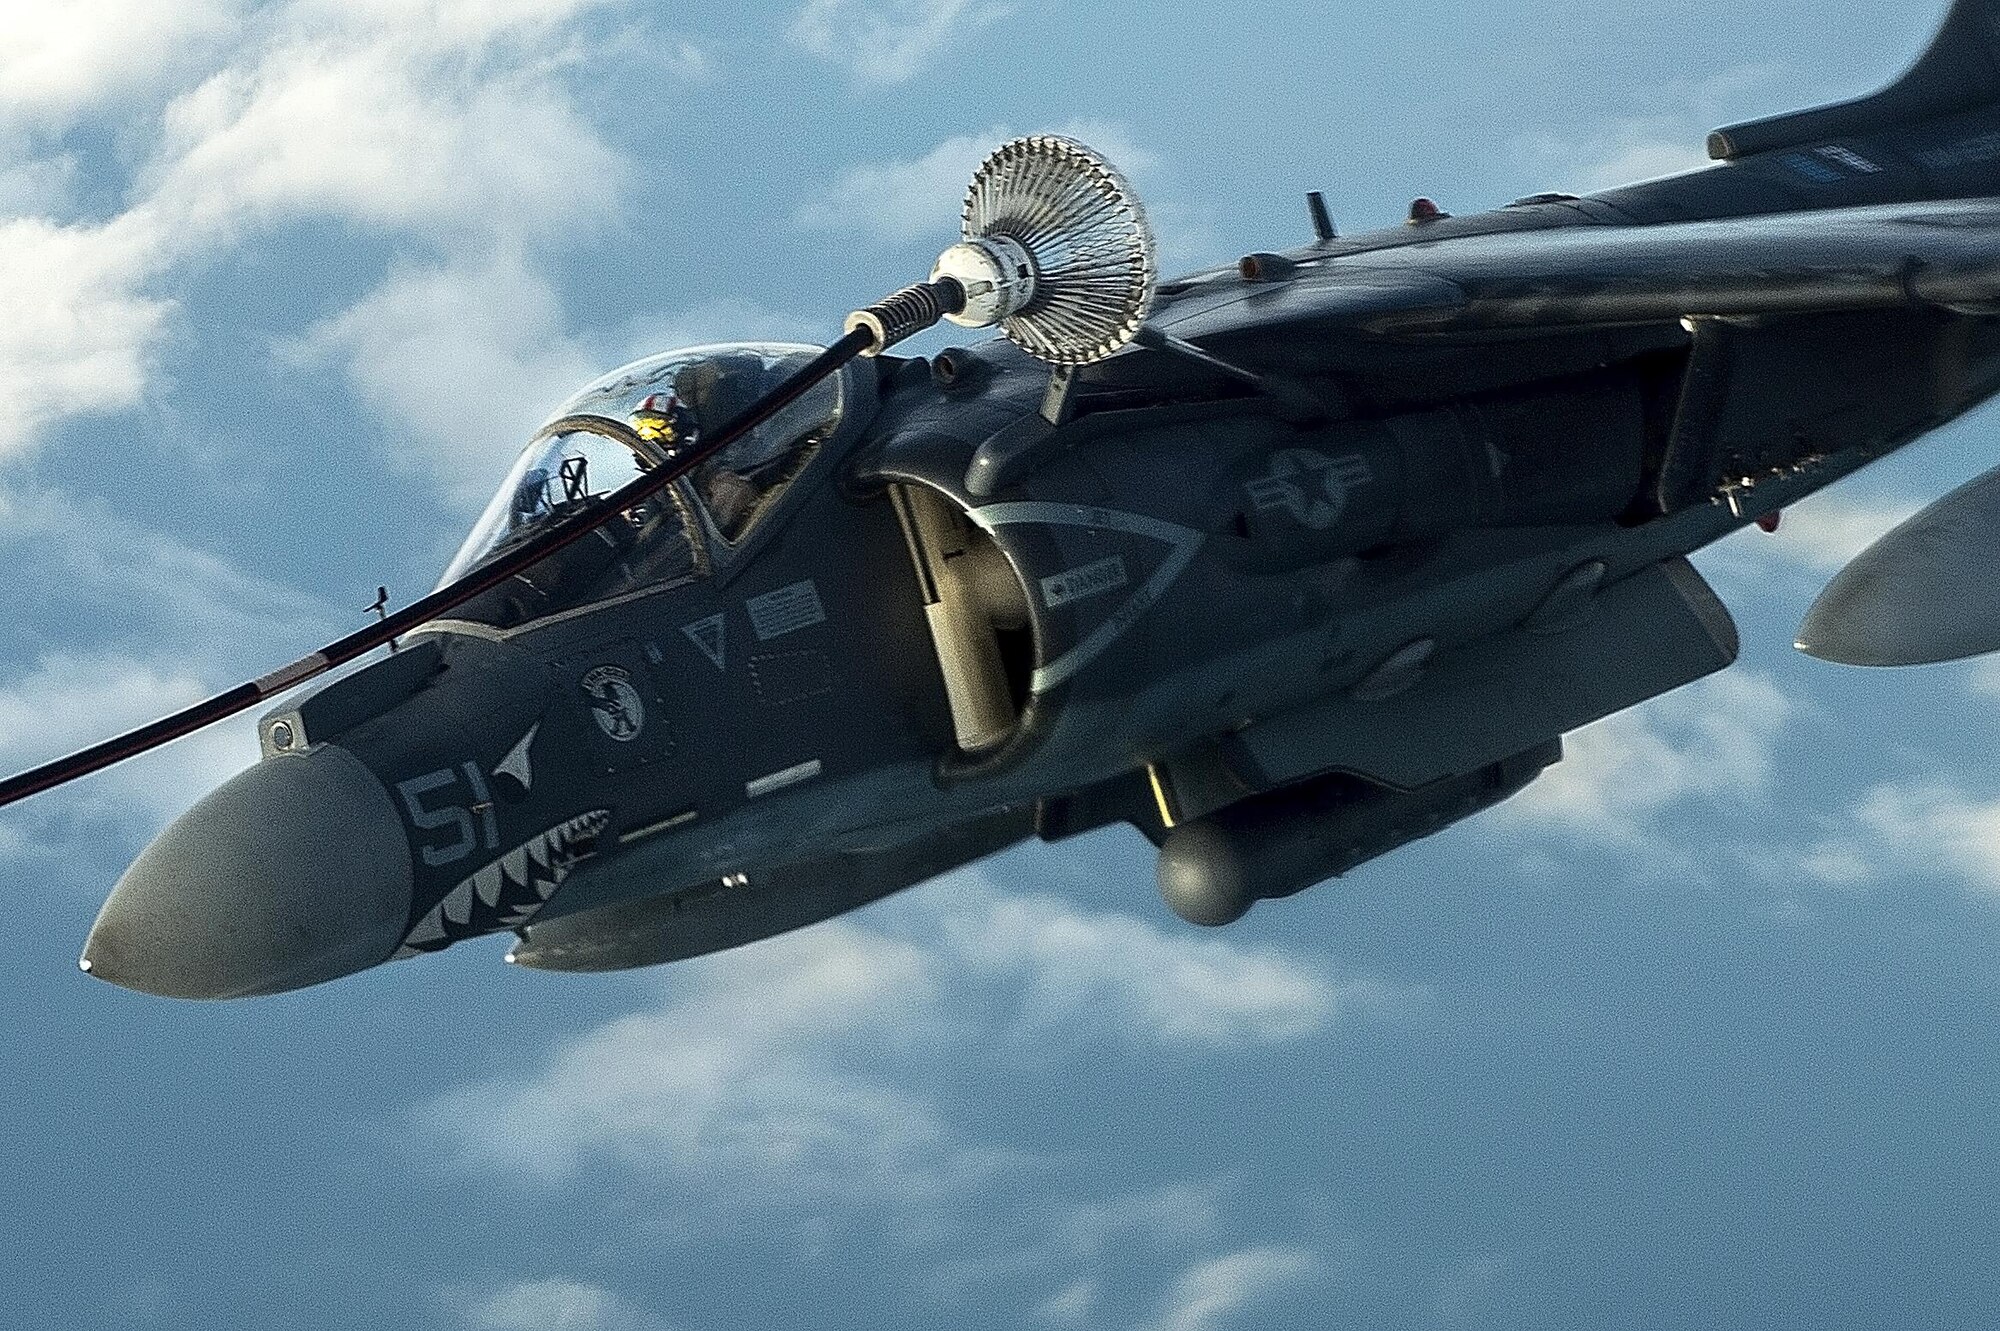 A U.S. Marine Corps AV-8B Harrier II refuels over Iraq in support of Operation Inherent Resolve, Dec. 31, 2015. OIR is the coalition intervention against the Islamic State of Iraq and the Levant. (U.S. Air Force photo by Tech. Sgt. Nathan Lipscomb)